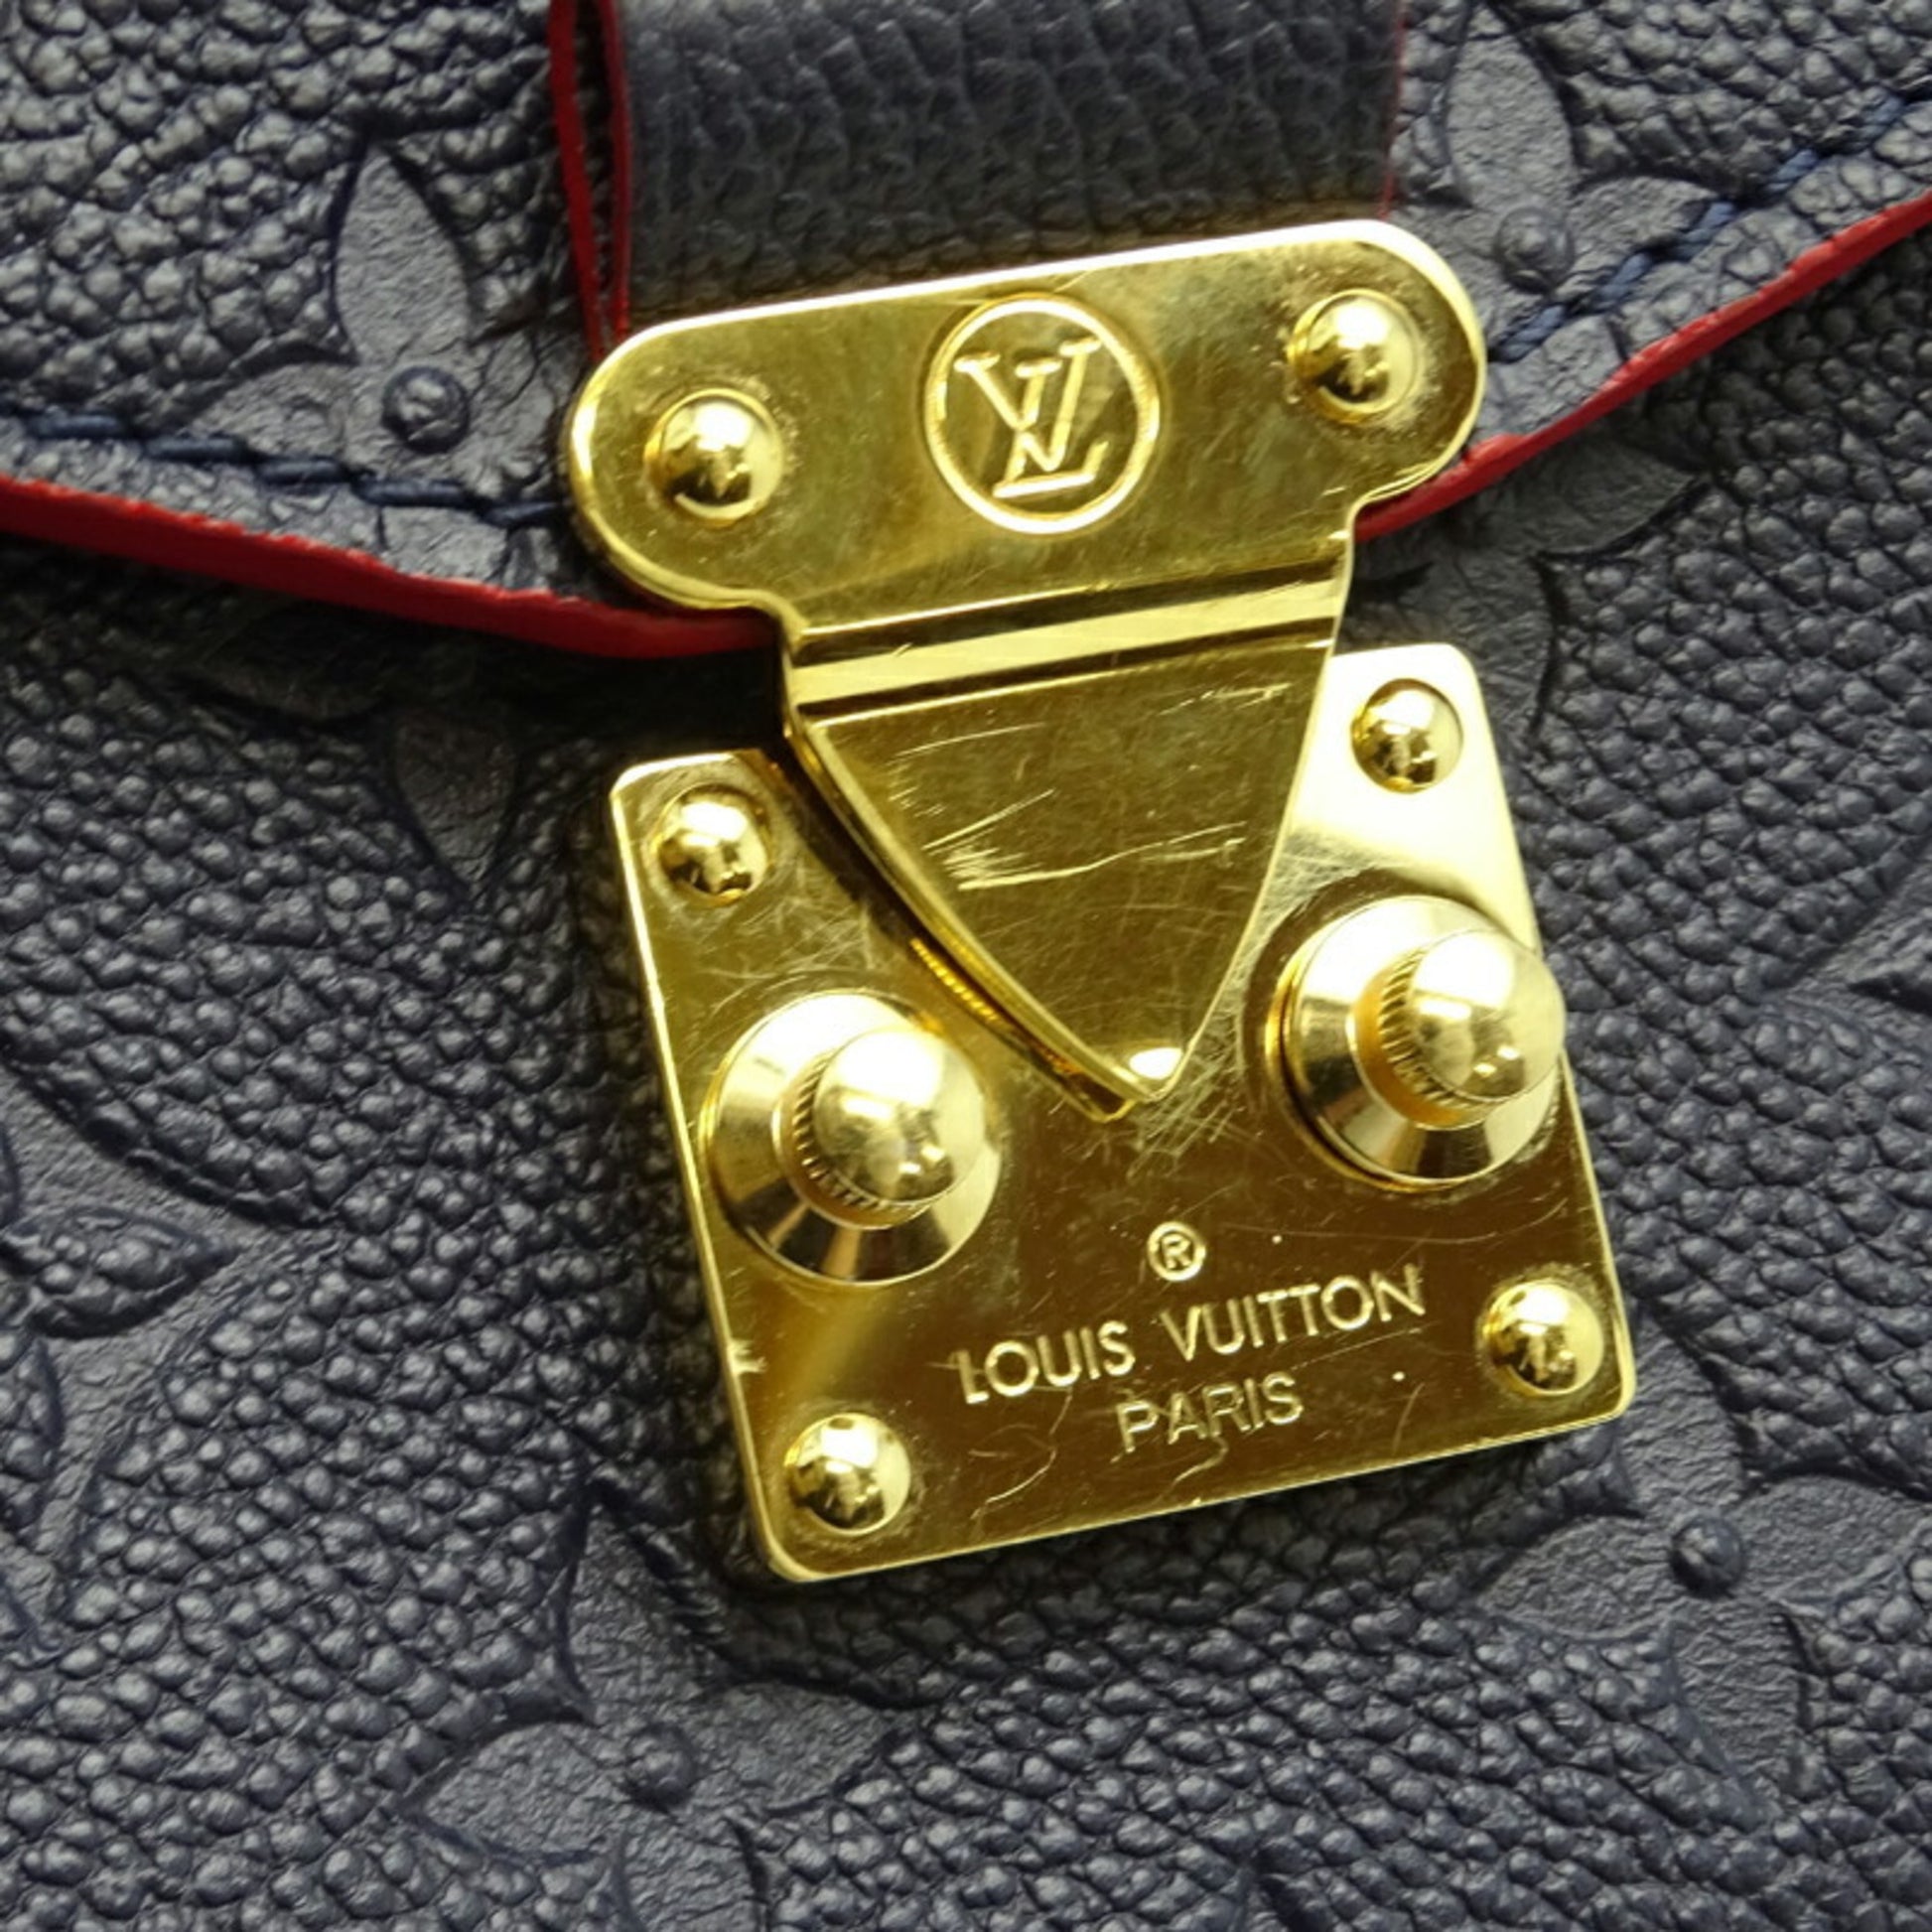 Metis leather crossbody bag Louis Vuitton Red in Leather - 37358200